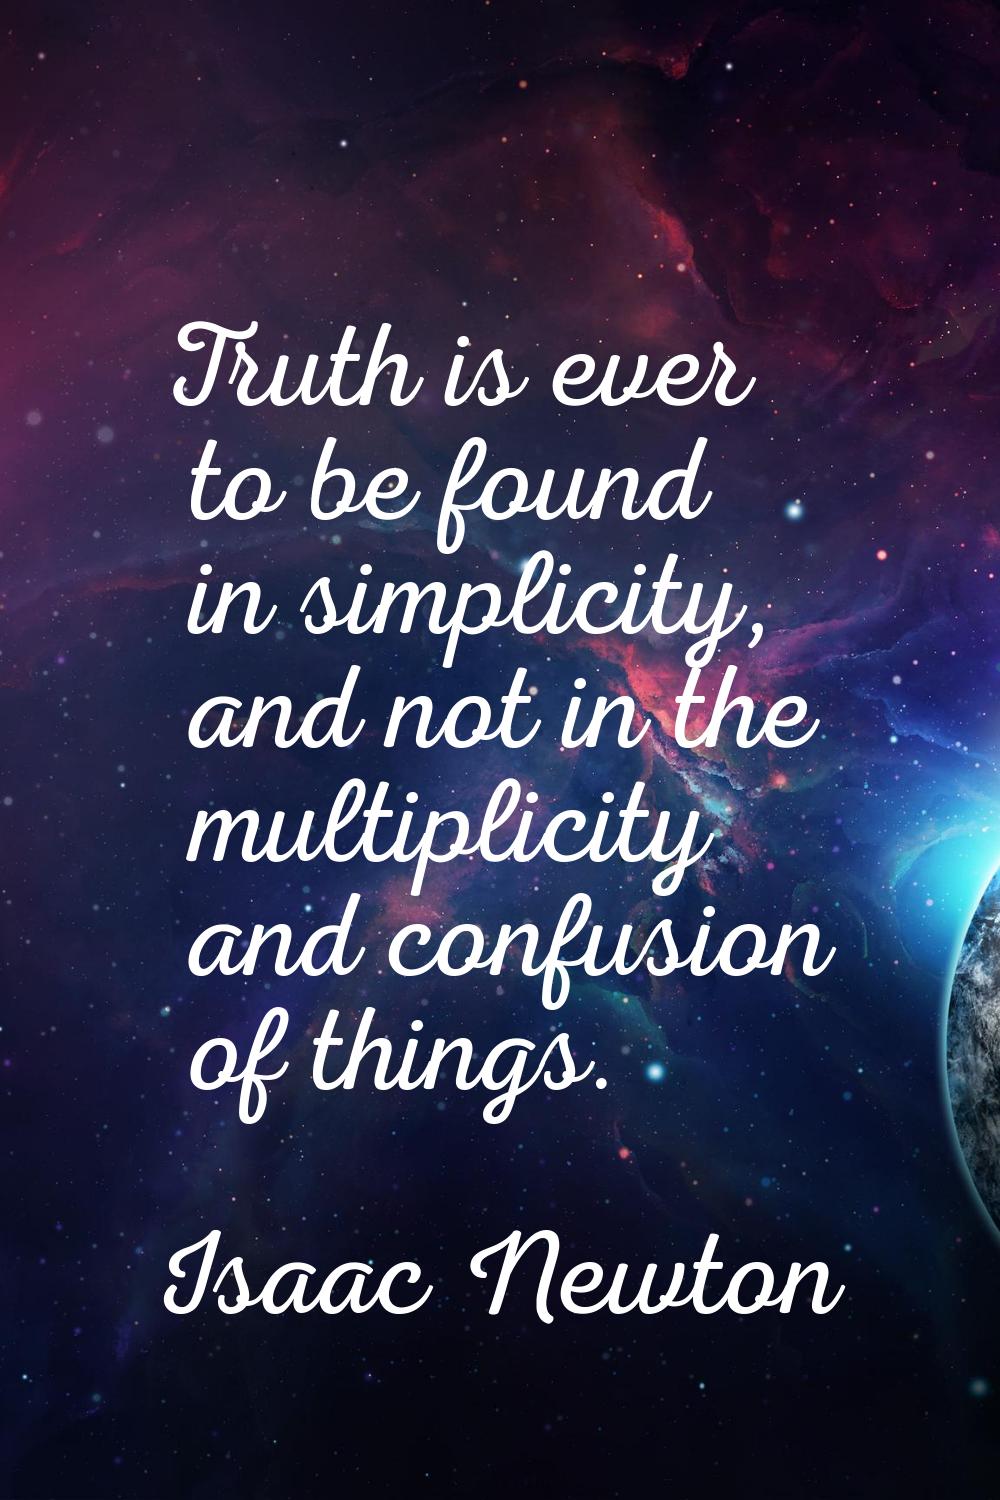 Truth is ever to be found in simplicity, and not in the multiplicity and confusion of things.